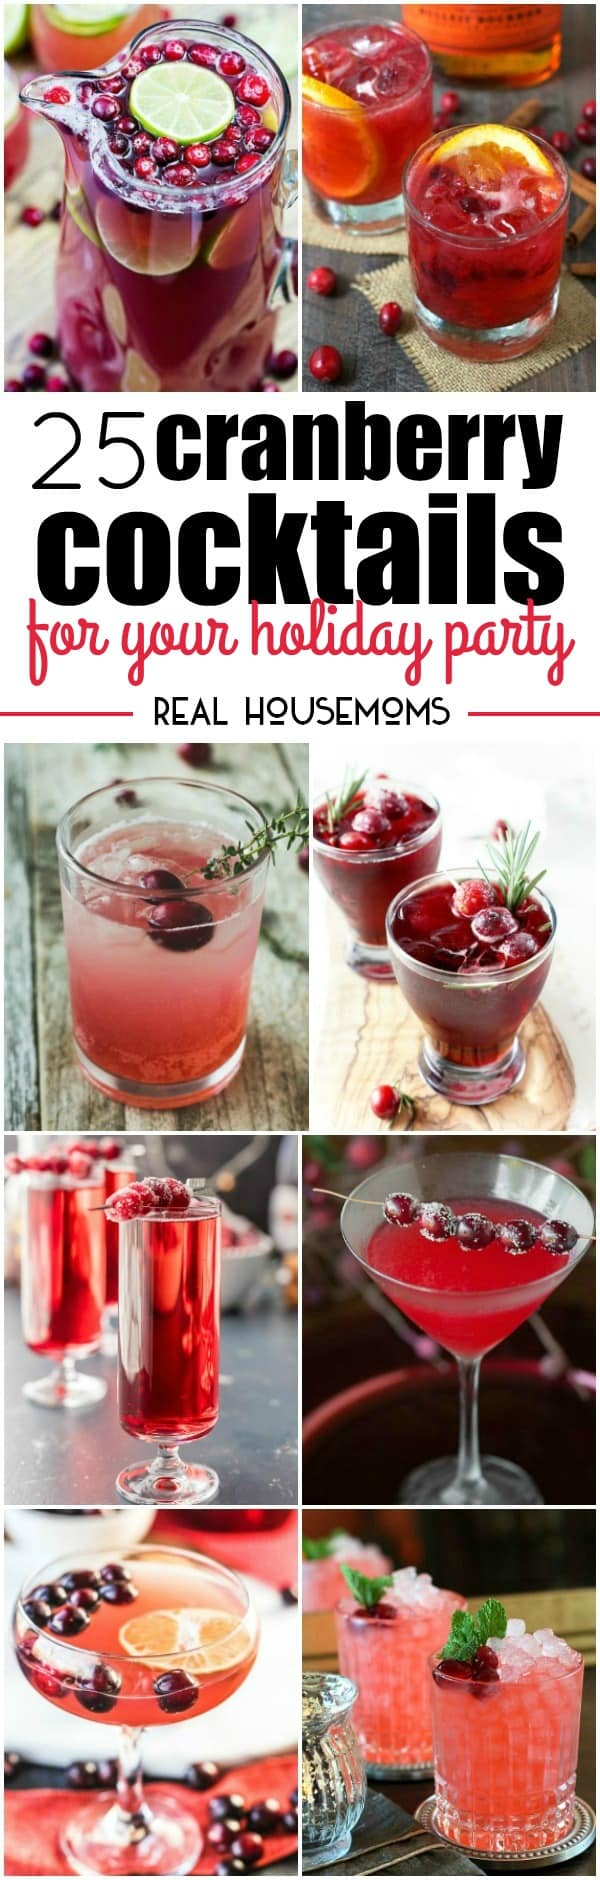 'Tis the season for family get-togethers, parties, and spending time with friends. There's no better way to get the party started than these delicious 25 Cranberry Cocktails for Your Holiday Party!